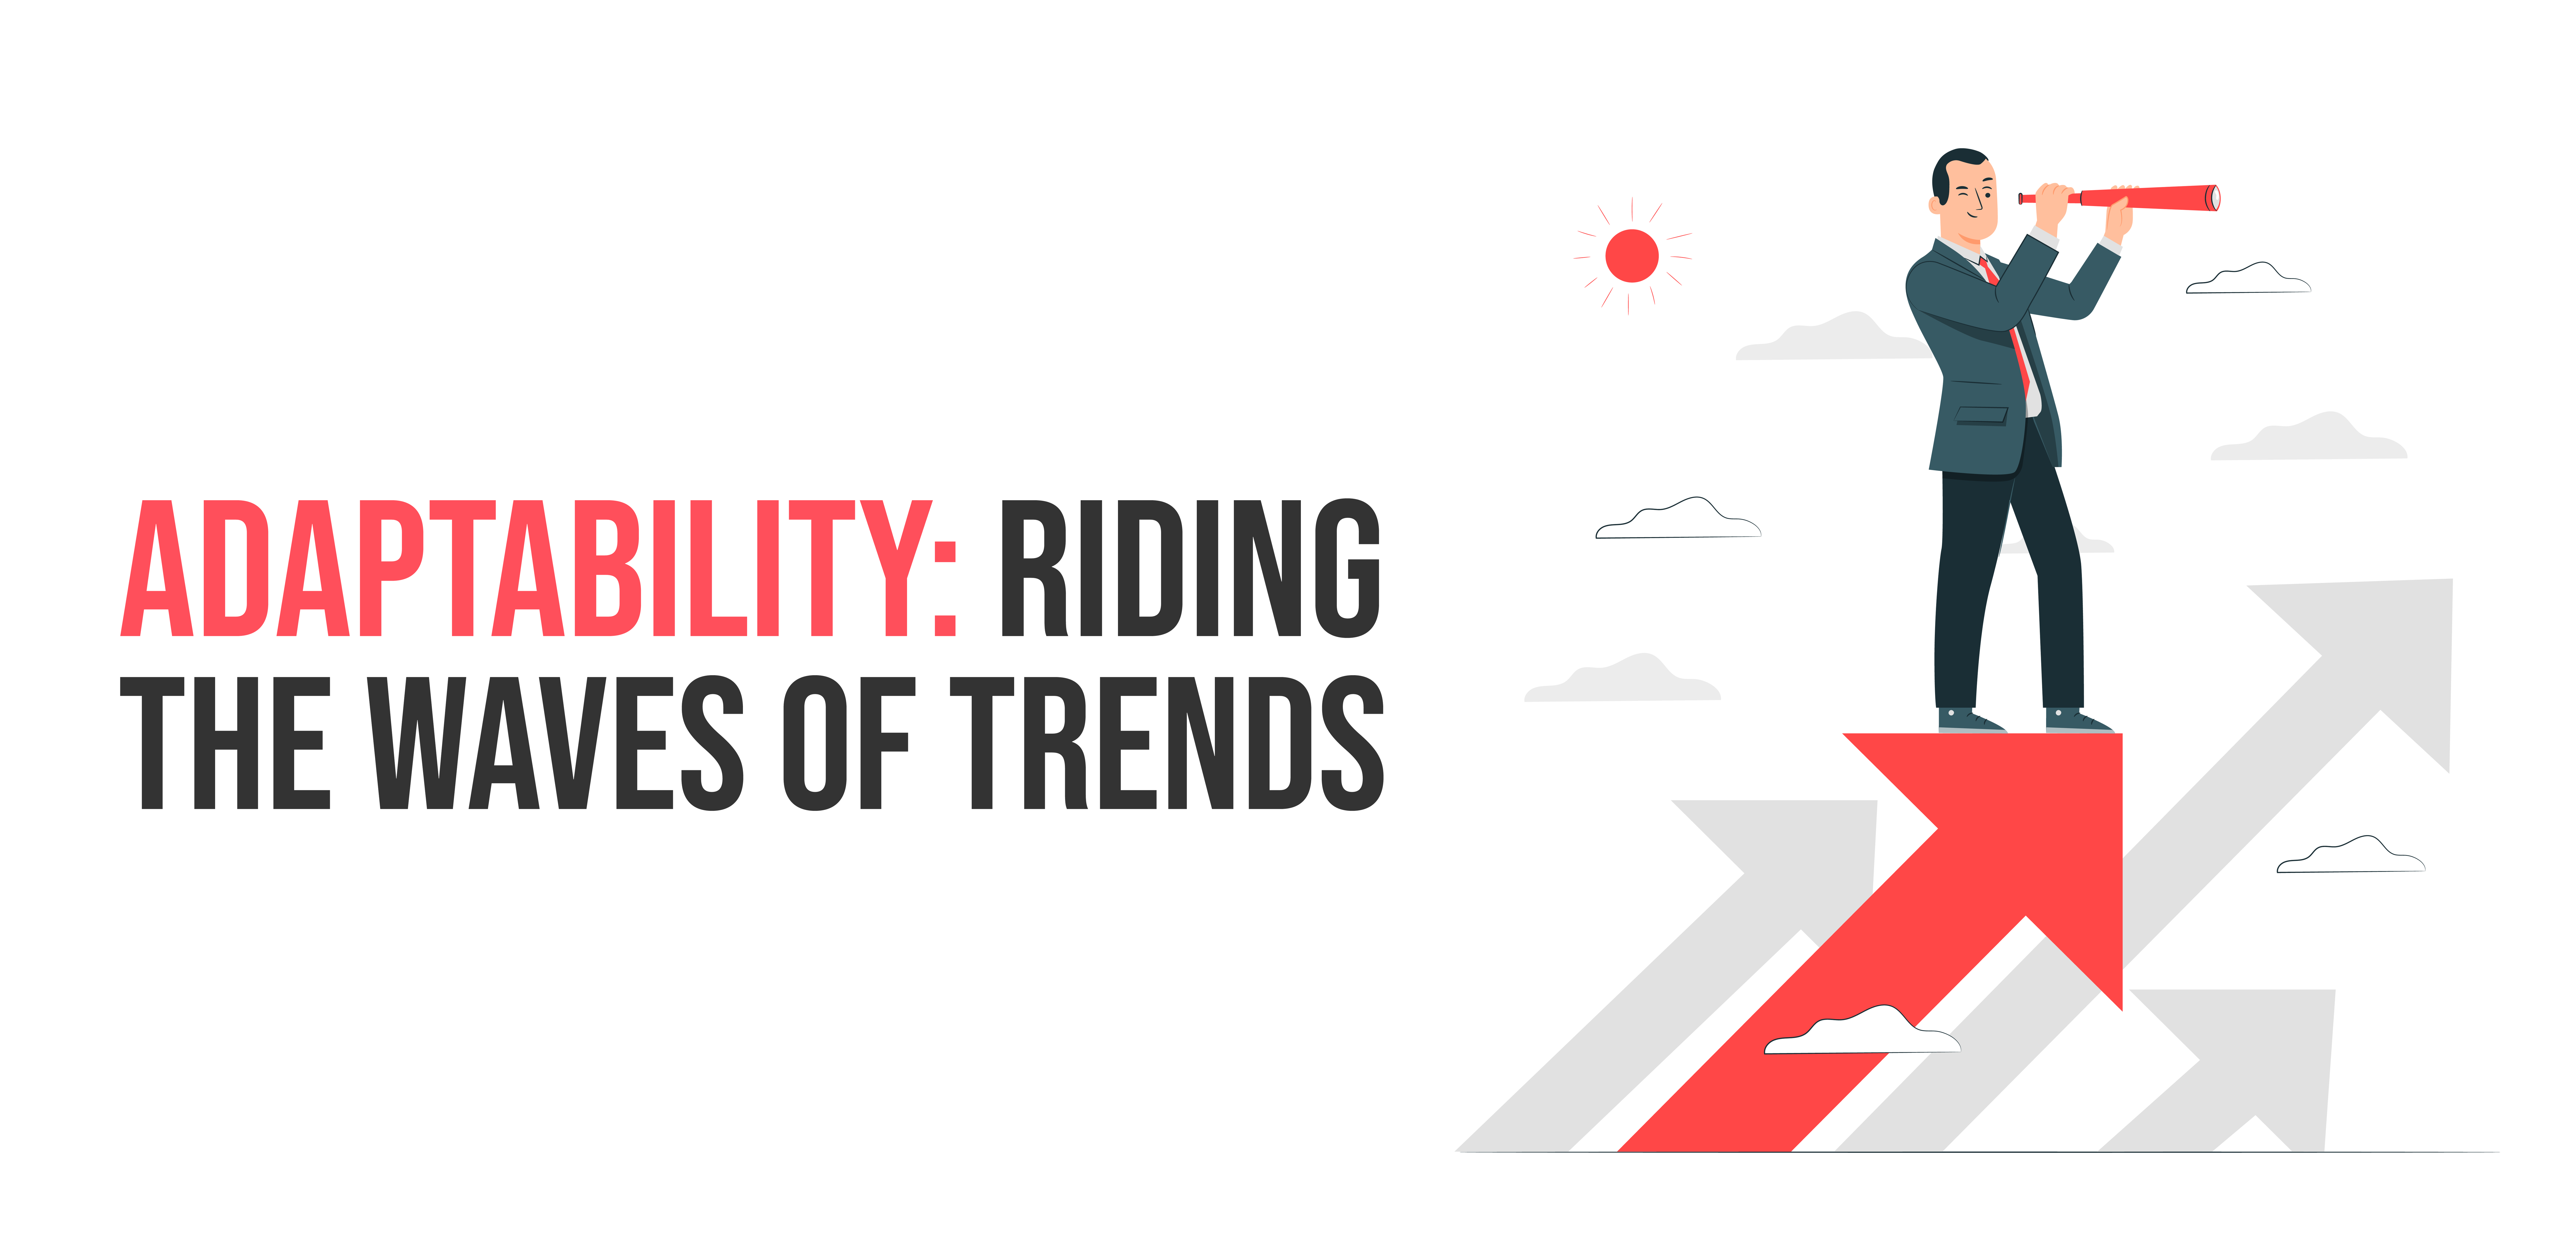 Adaptability - Riding the Waves of Trends